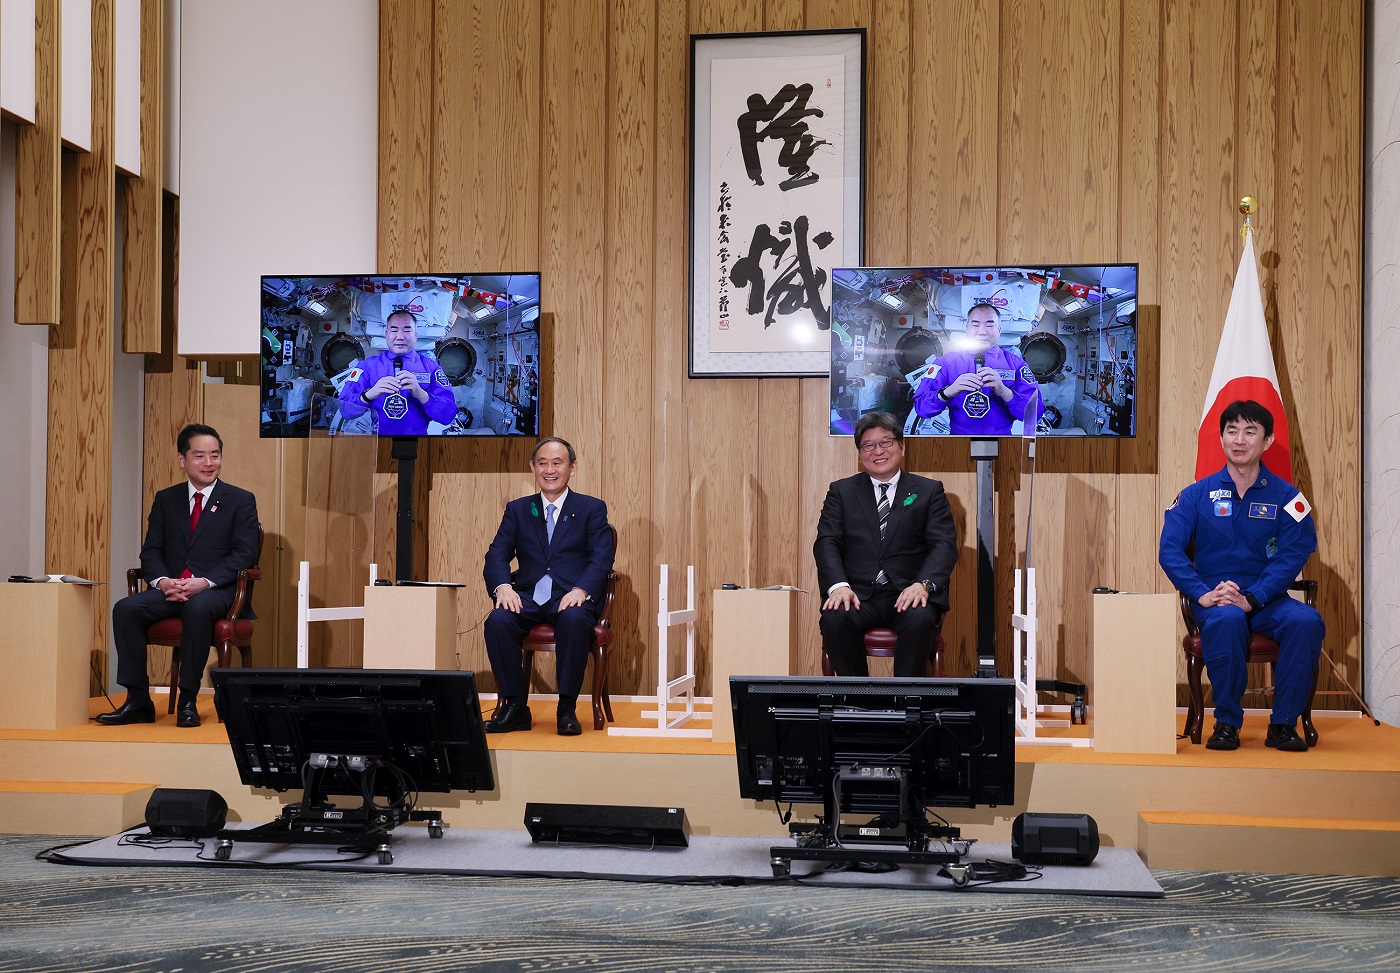 Photograph of the Prime Minister conversing with Astronaut NOGUCHI (1)